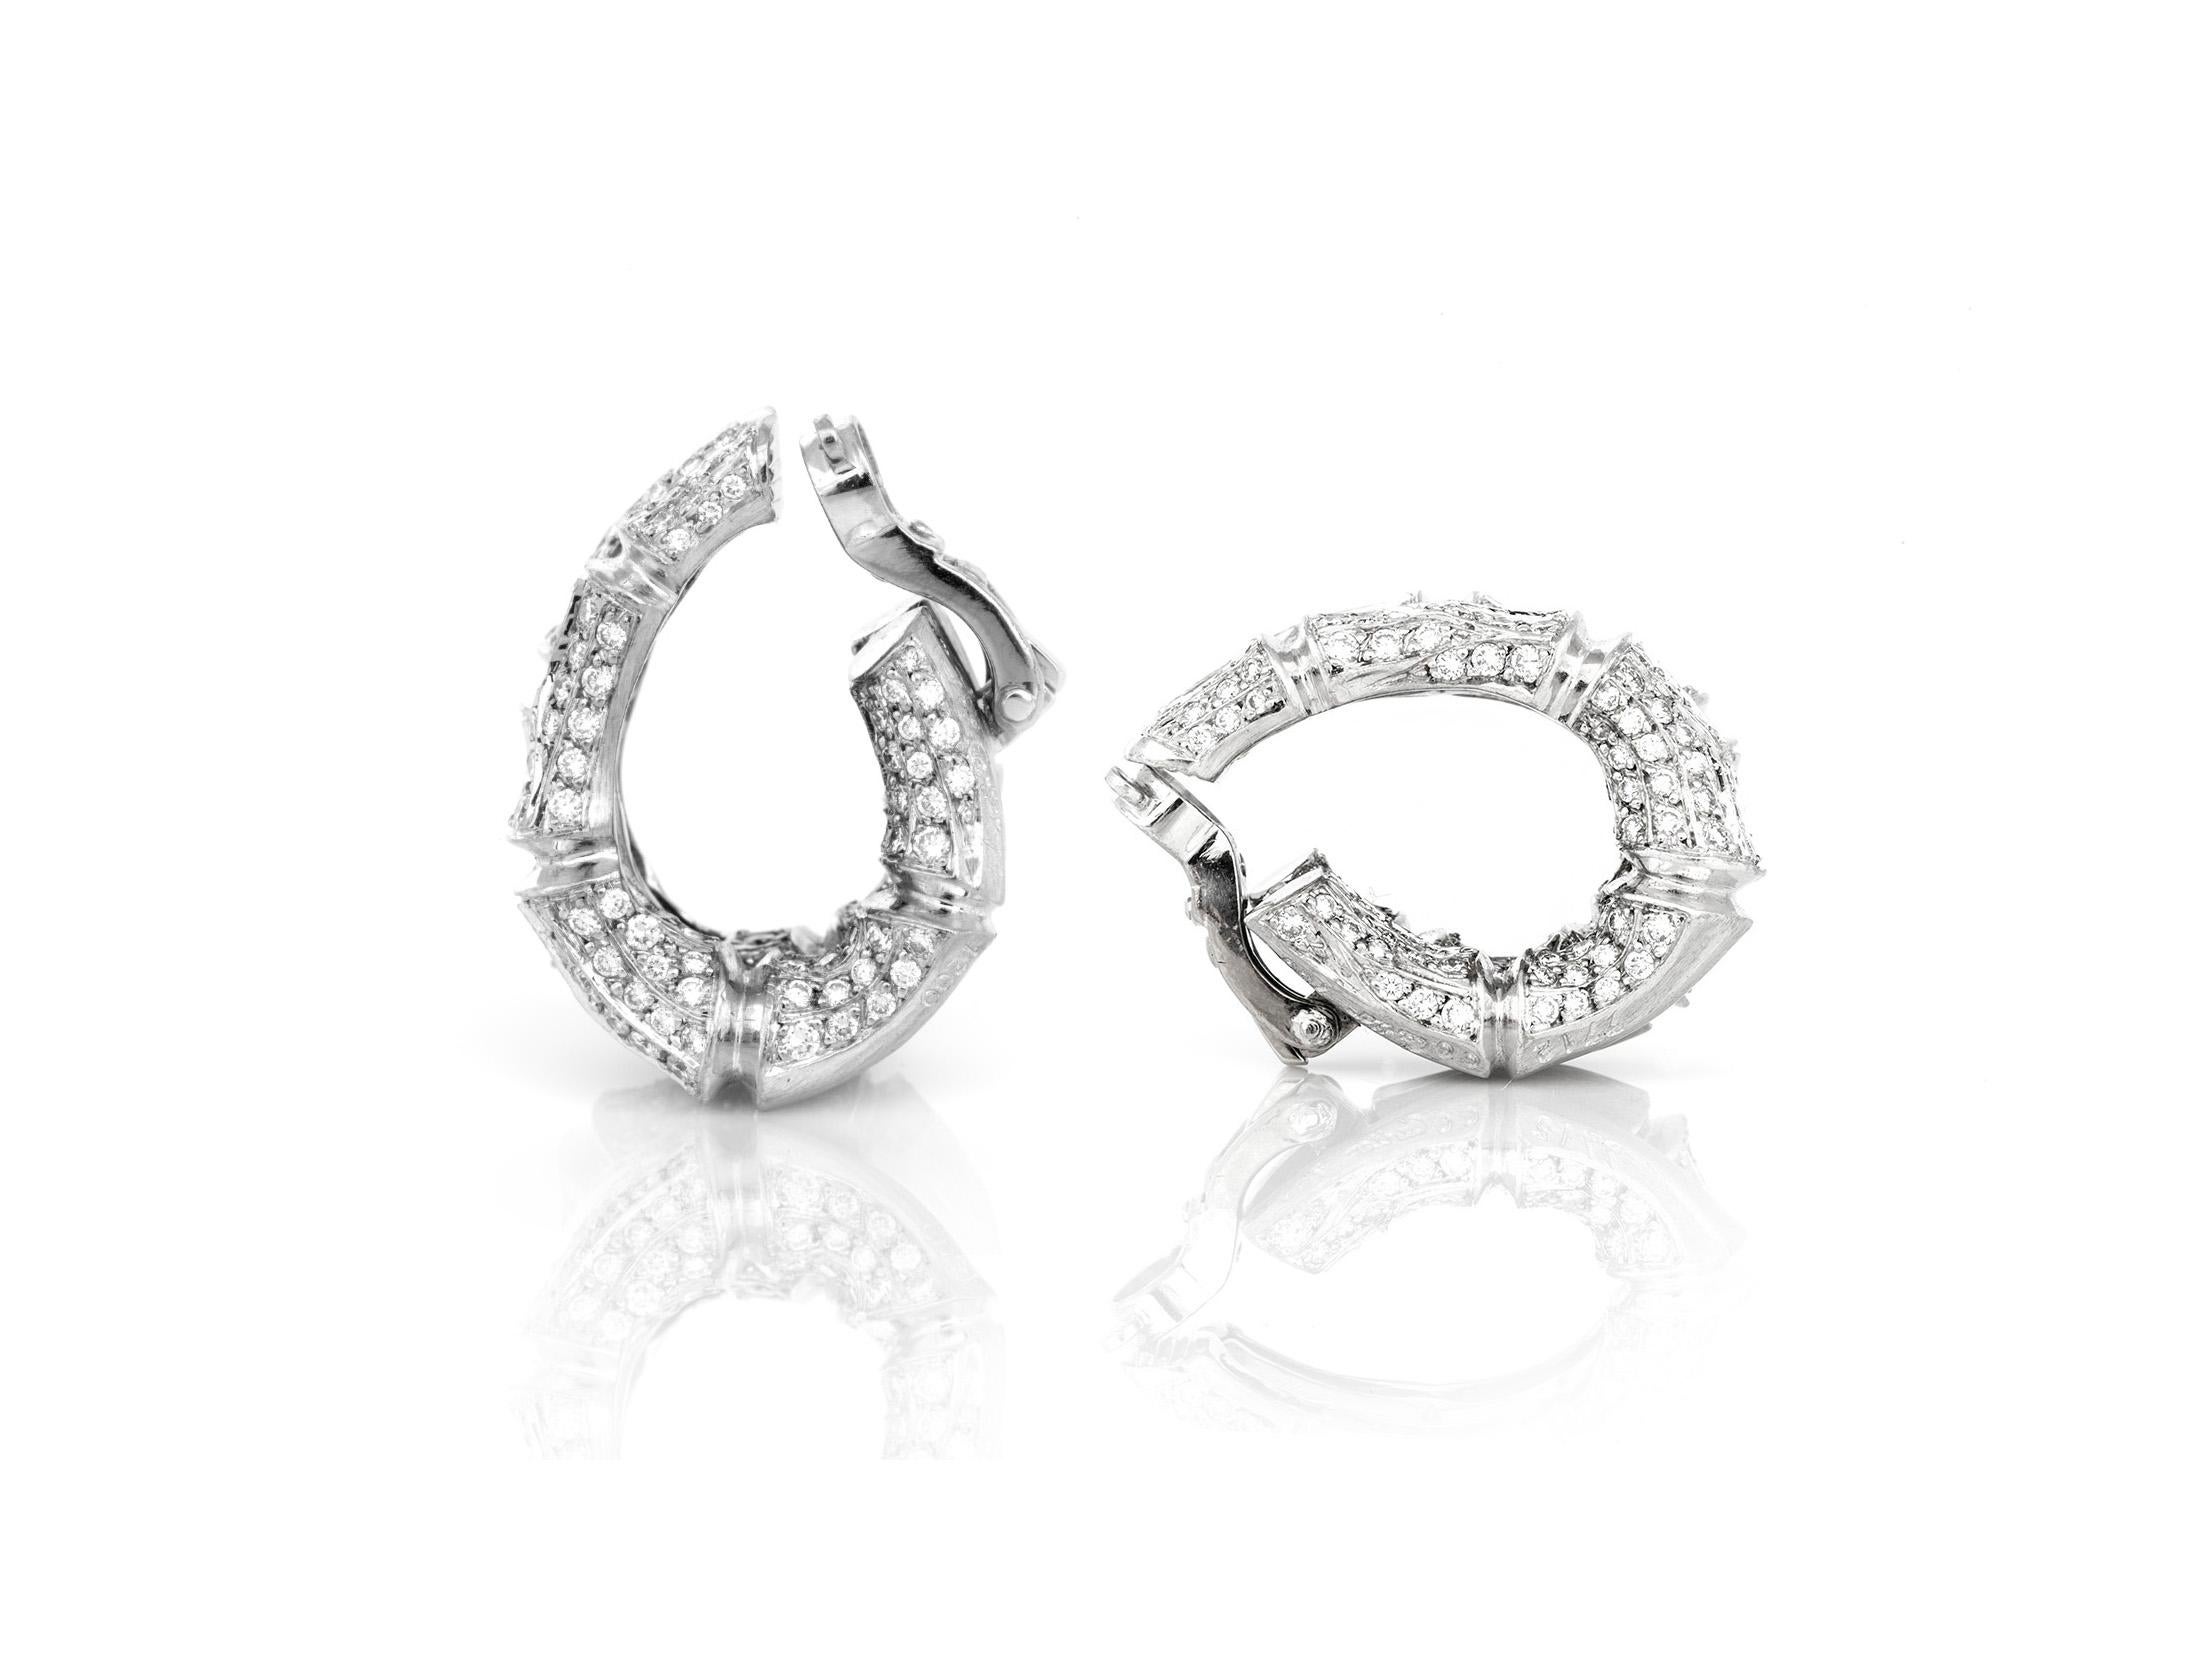 An elegant modern deco inspired Cartier hoop clip-on earrings crafted in 18k white gold with brilliant white round diamonds.  Available in a set with a complimenting ring.  Please inquire if interested.